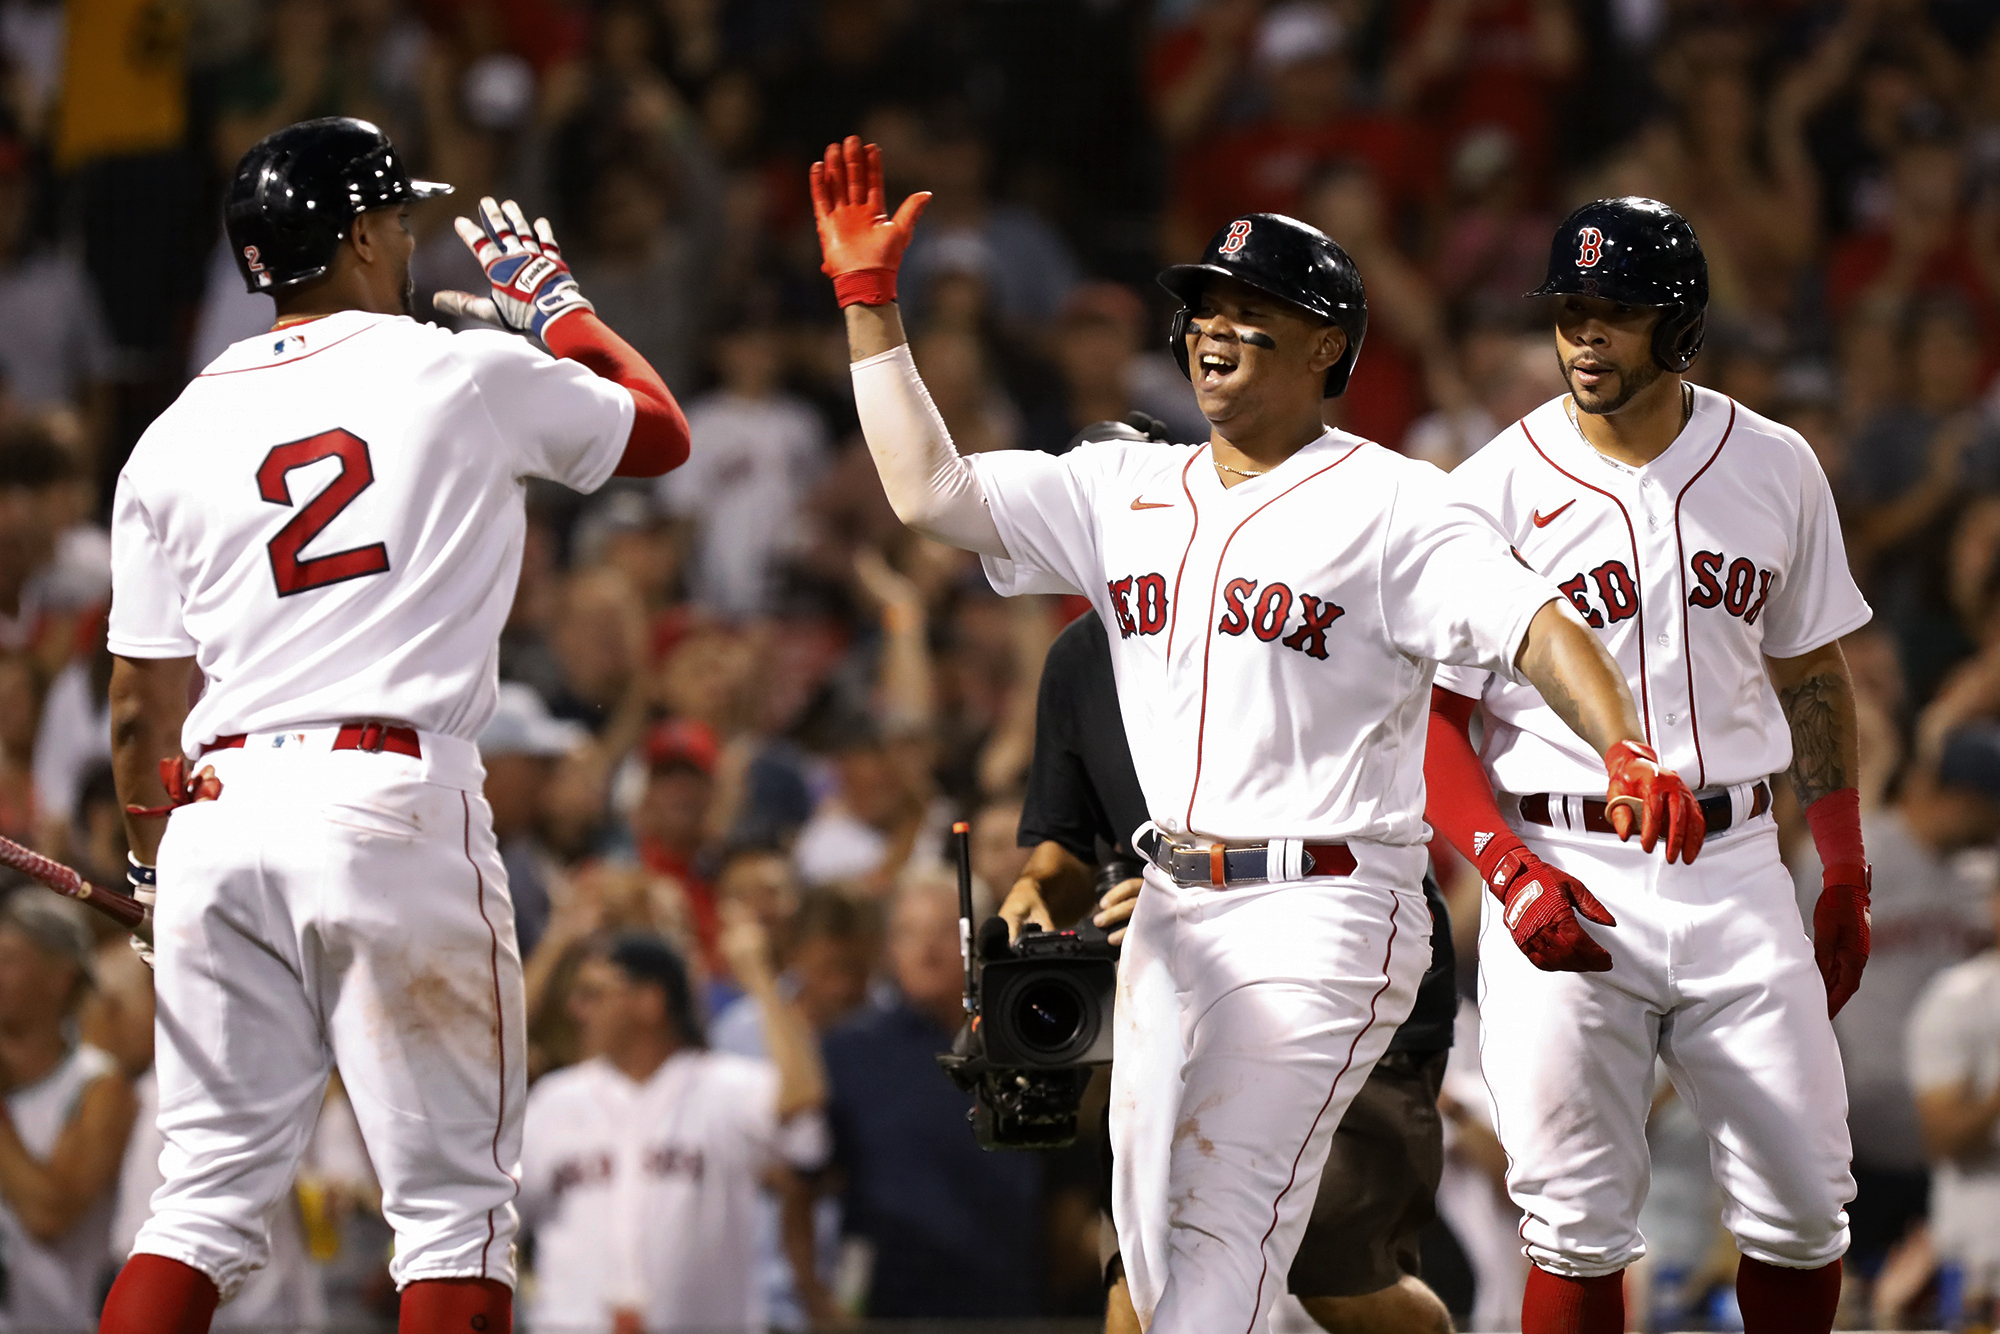 Yankees drop another to Red Sox, 5-3, this time at Fenway